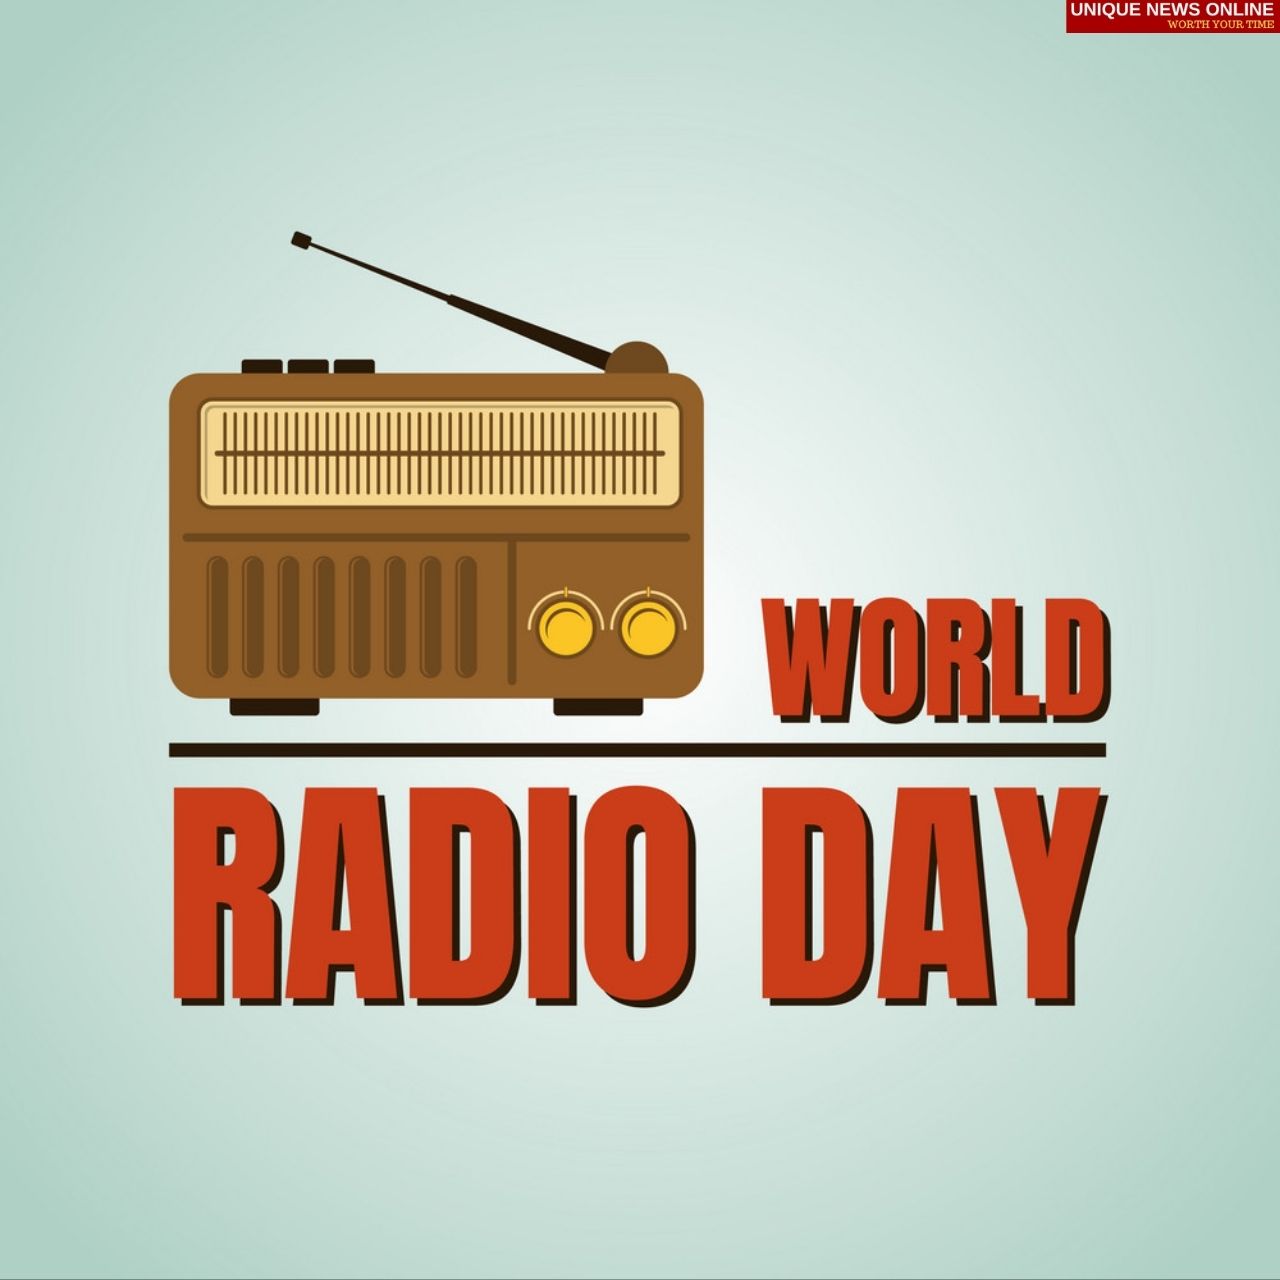 World Radio Day 2022 Quotes, Wishes, HD Images, Messages, Greetingst, Posters, Banners to Share